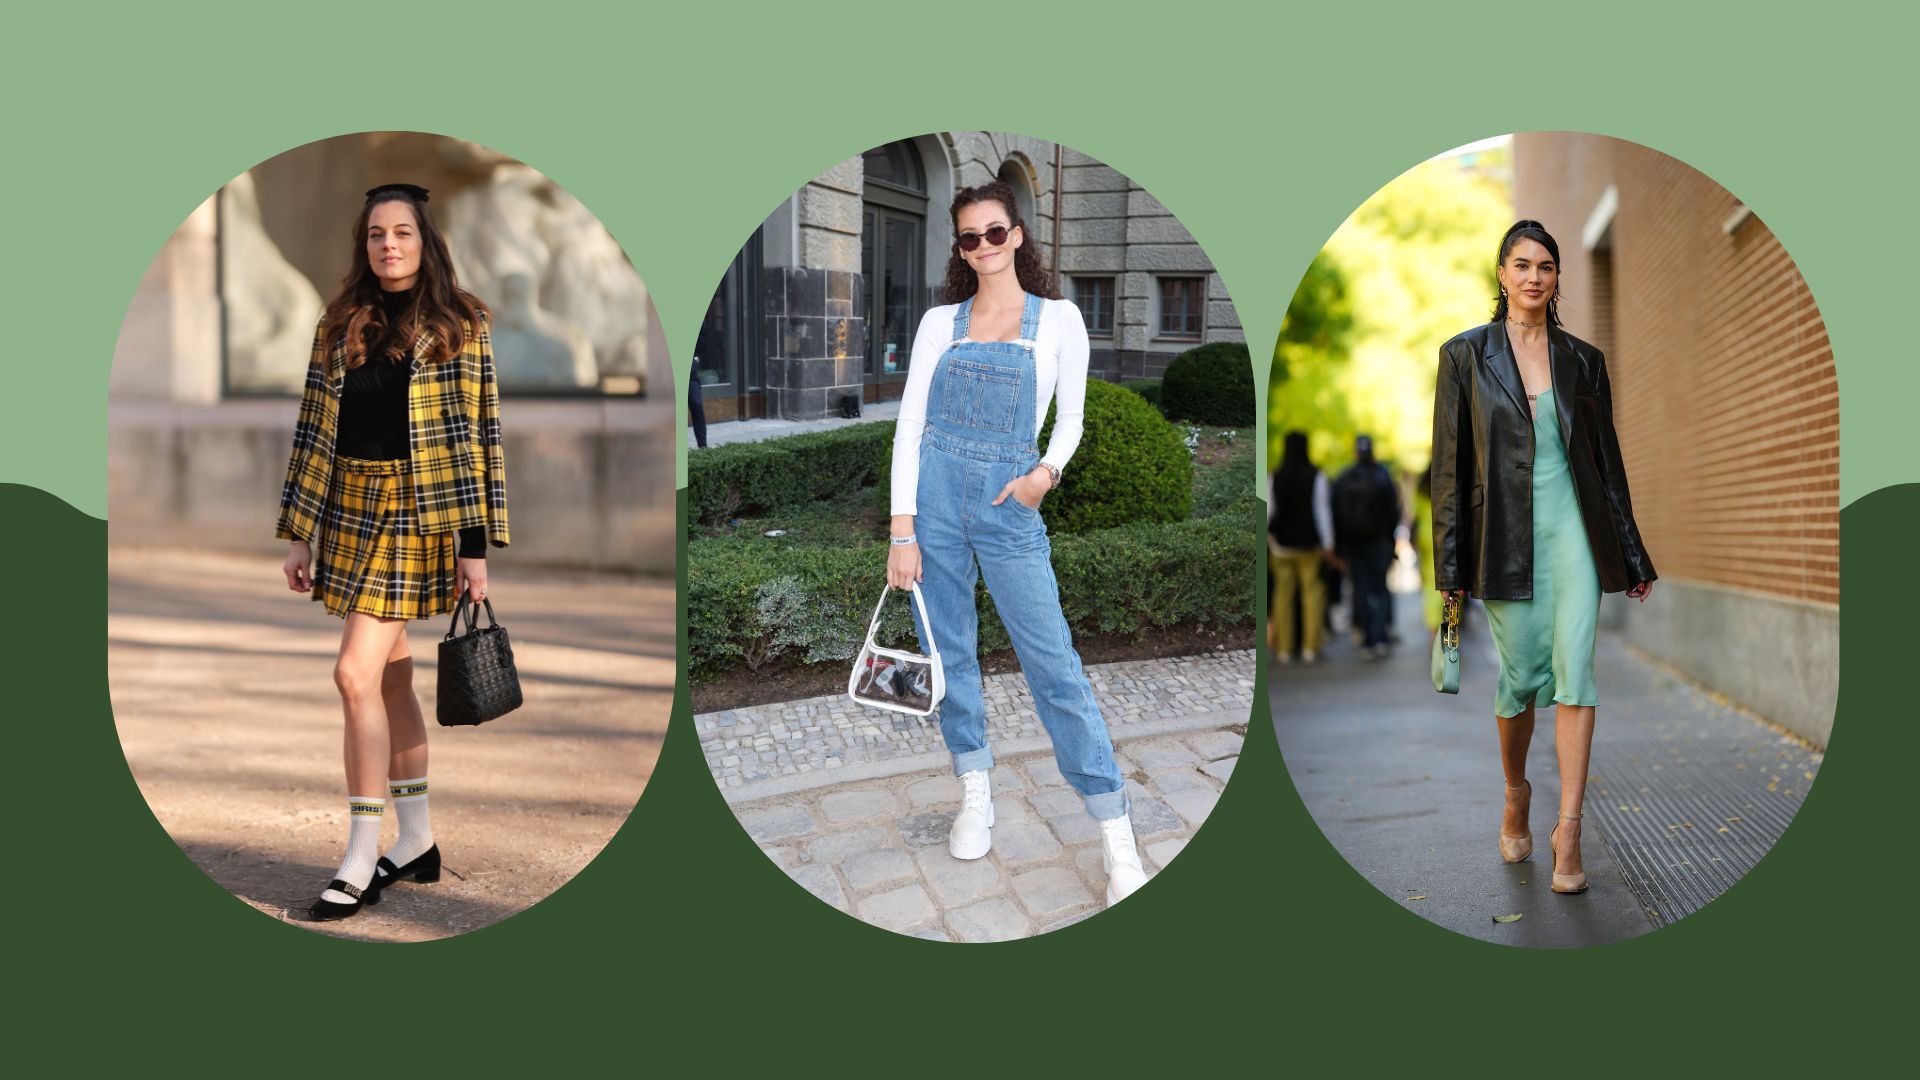 90s fashion trends are back - here's how to wear them